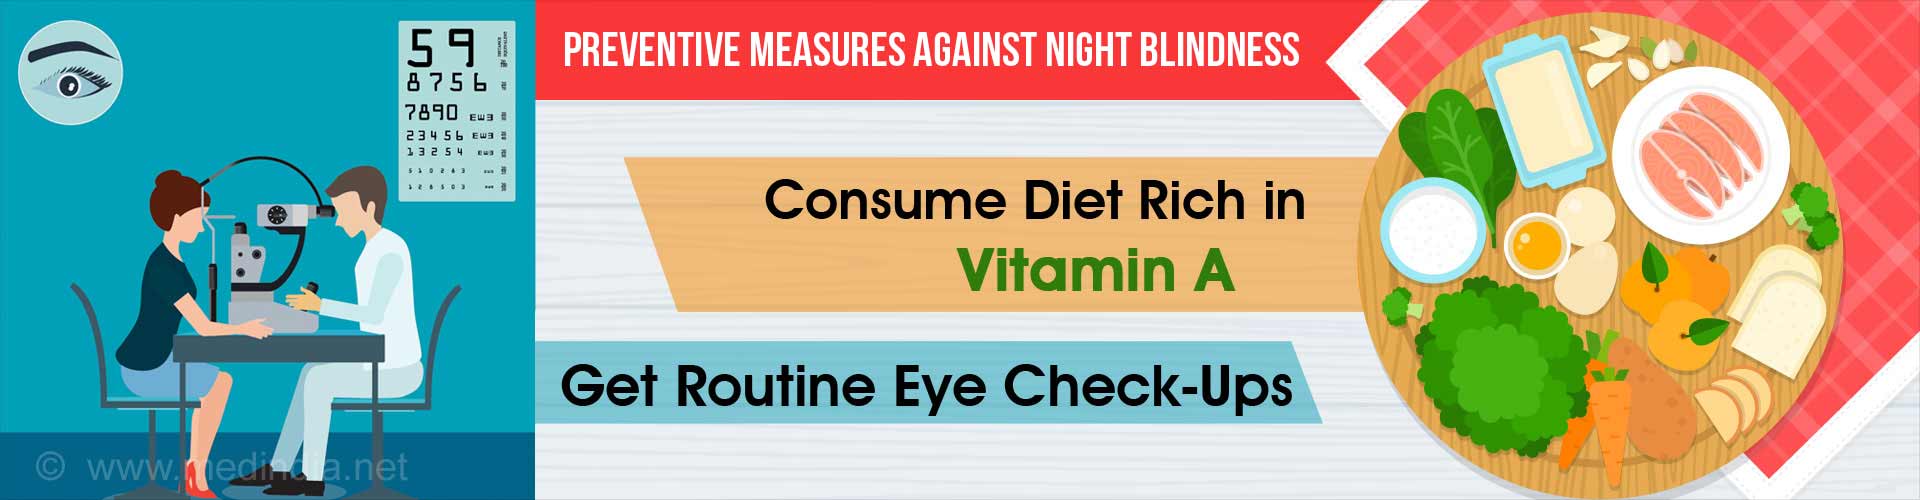 Preventive measure against night blindness
- consume diet rich n vitamin A
- get routine eye check-ups
